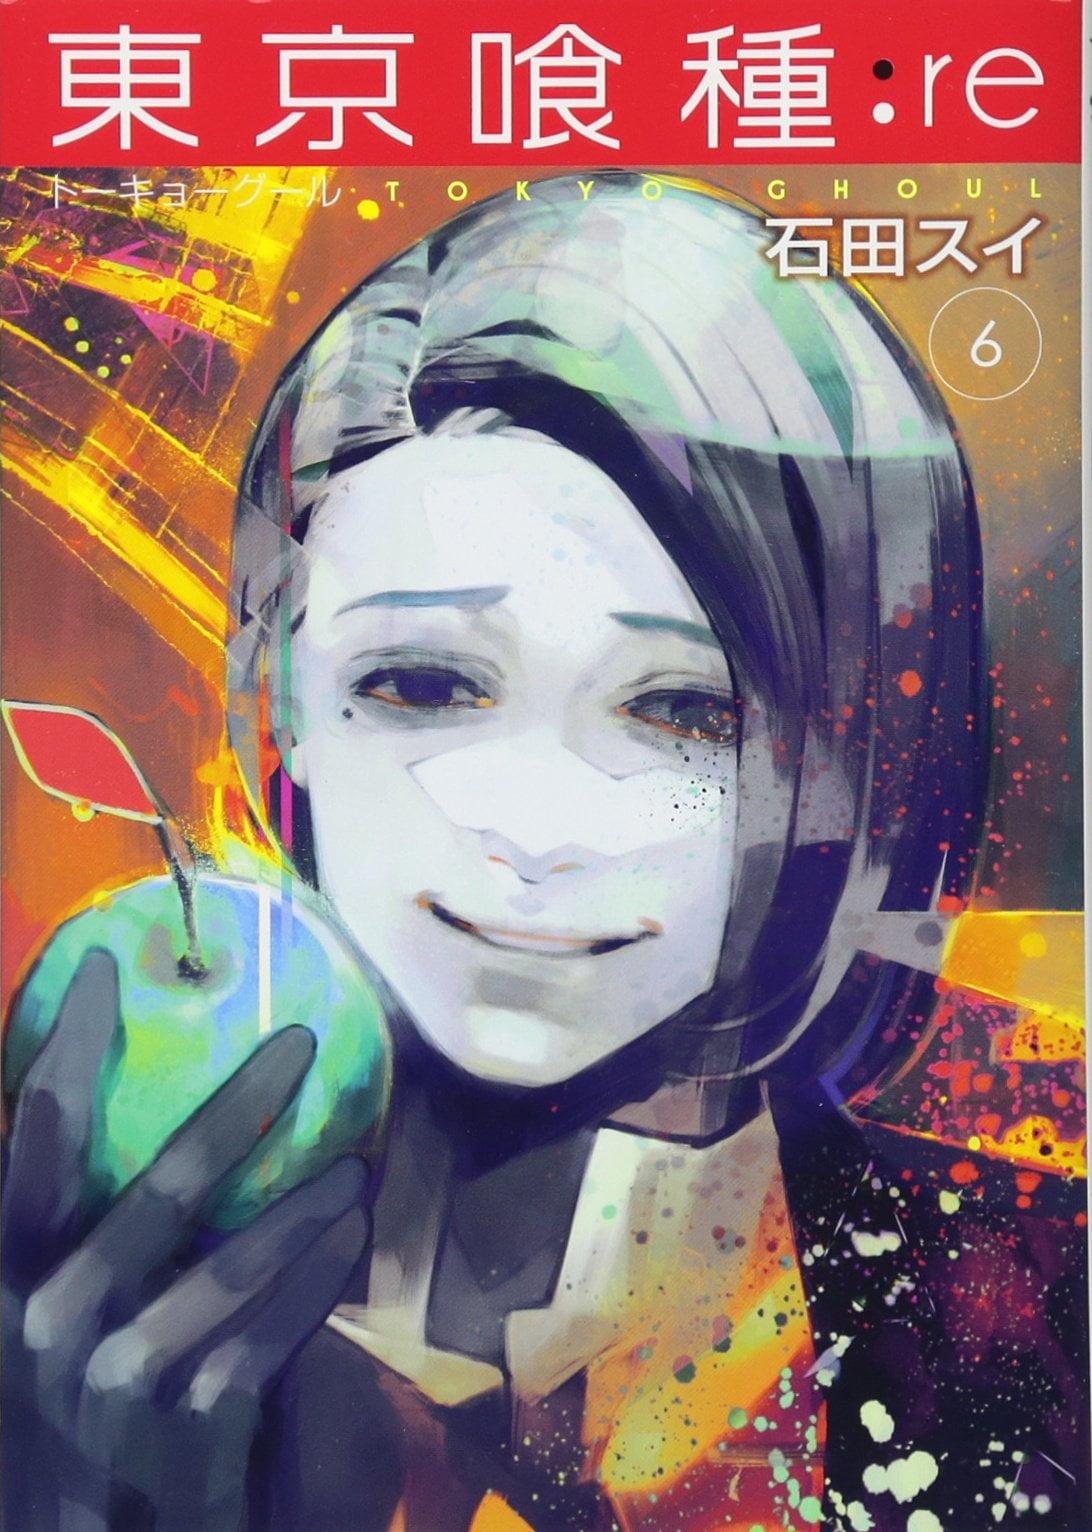 Tokyo Ghoul: re 6 (Japanese Edition)